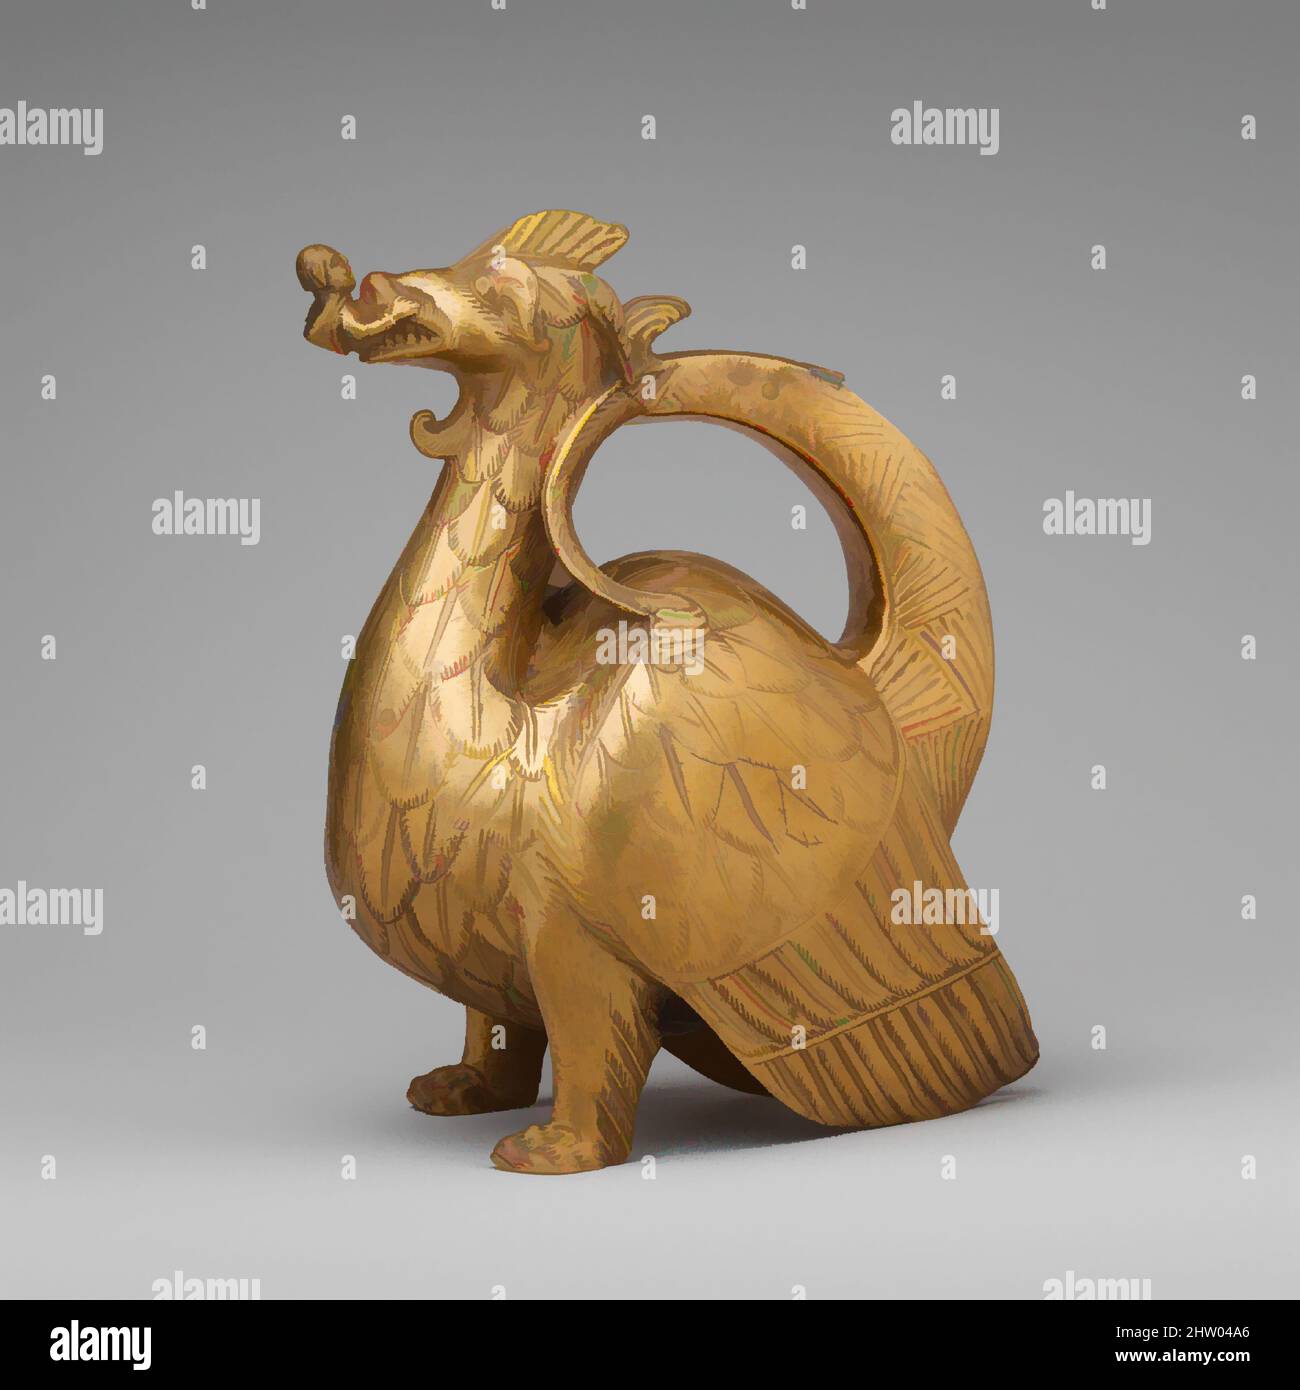 Art inspired by Aquamanile in the Form of a Dragon, ca. 1200, North German, Copper alloy, Overall: 8 3/4 x 7 1/4 in., 4.4 lb. (22.2 x 18.4 cm, 2 kg), Metalwork-Copper alloy, Aquamaniles, which are water vessels used for washing hands, served both liturgical and secular purposes. Those, Classic works modernized by Artotop with a splash of modernity. Shapes, color and value, eye-catching visual impact on art. Emotions through freedom of artworks in a contemporary way. A timeless message pursuing a wildly creative new direction. Artists turning to the digital medium and creating the Artotop NFT Stock Photo